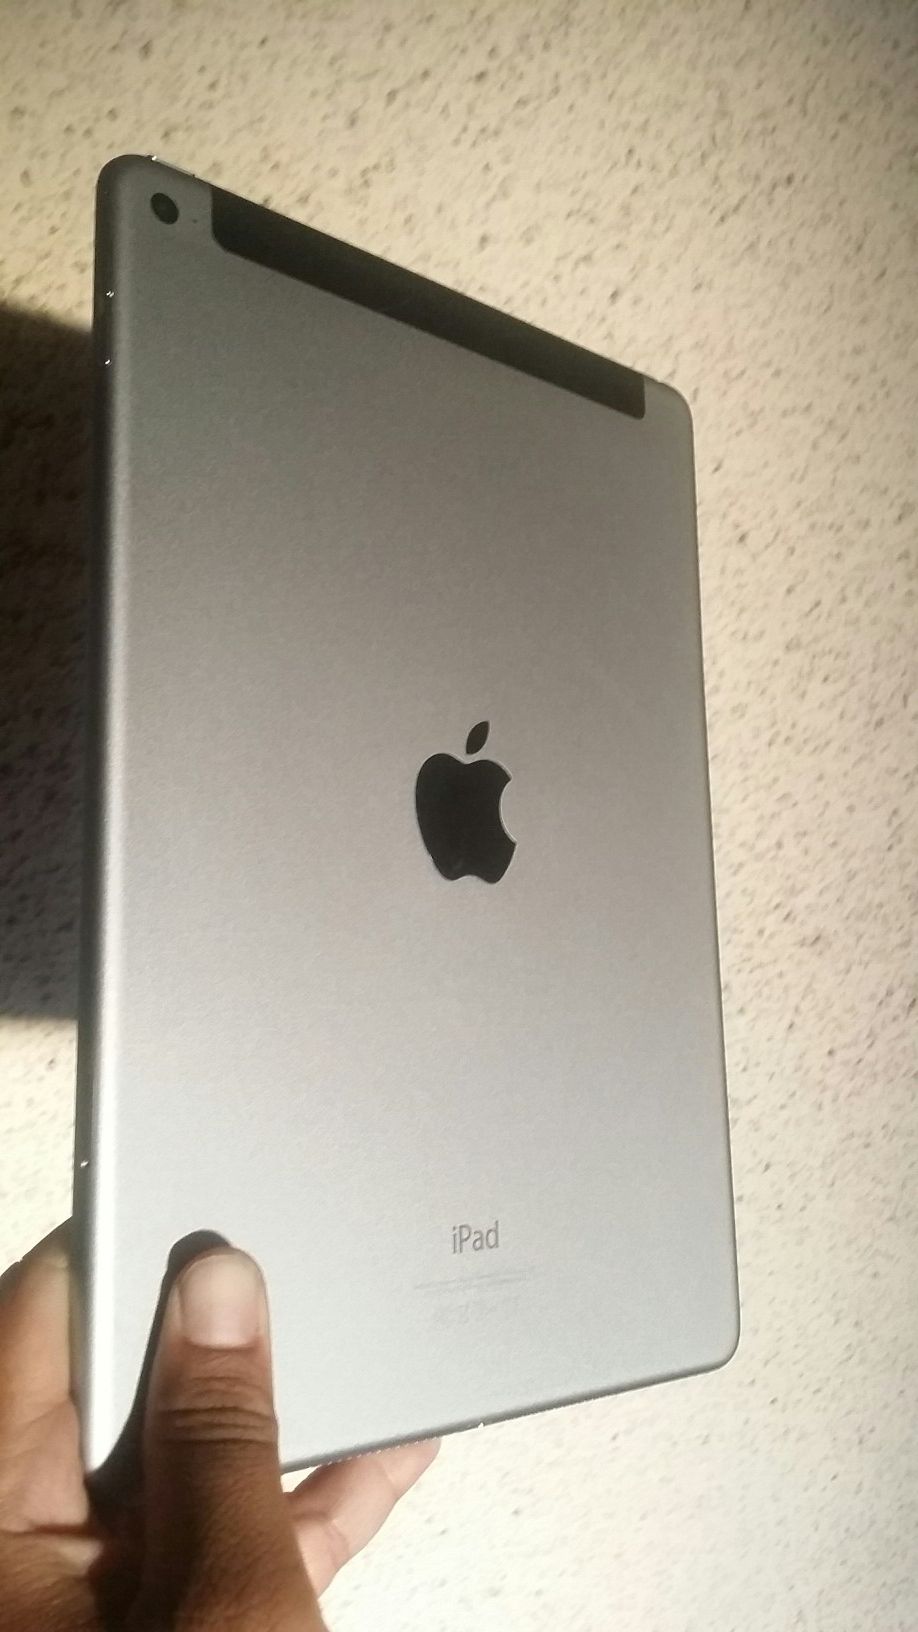 Apple IPad Air 2 (9.7" Retina / Thinnest iPad ever) 16GB WiFi + Cellular (Unlocked) with complete Accessories